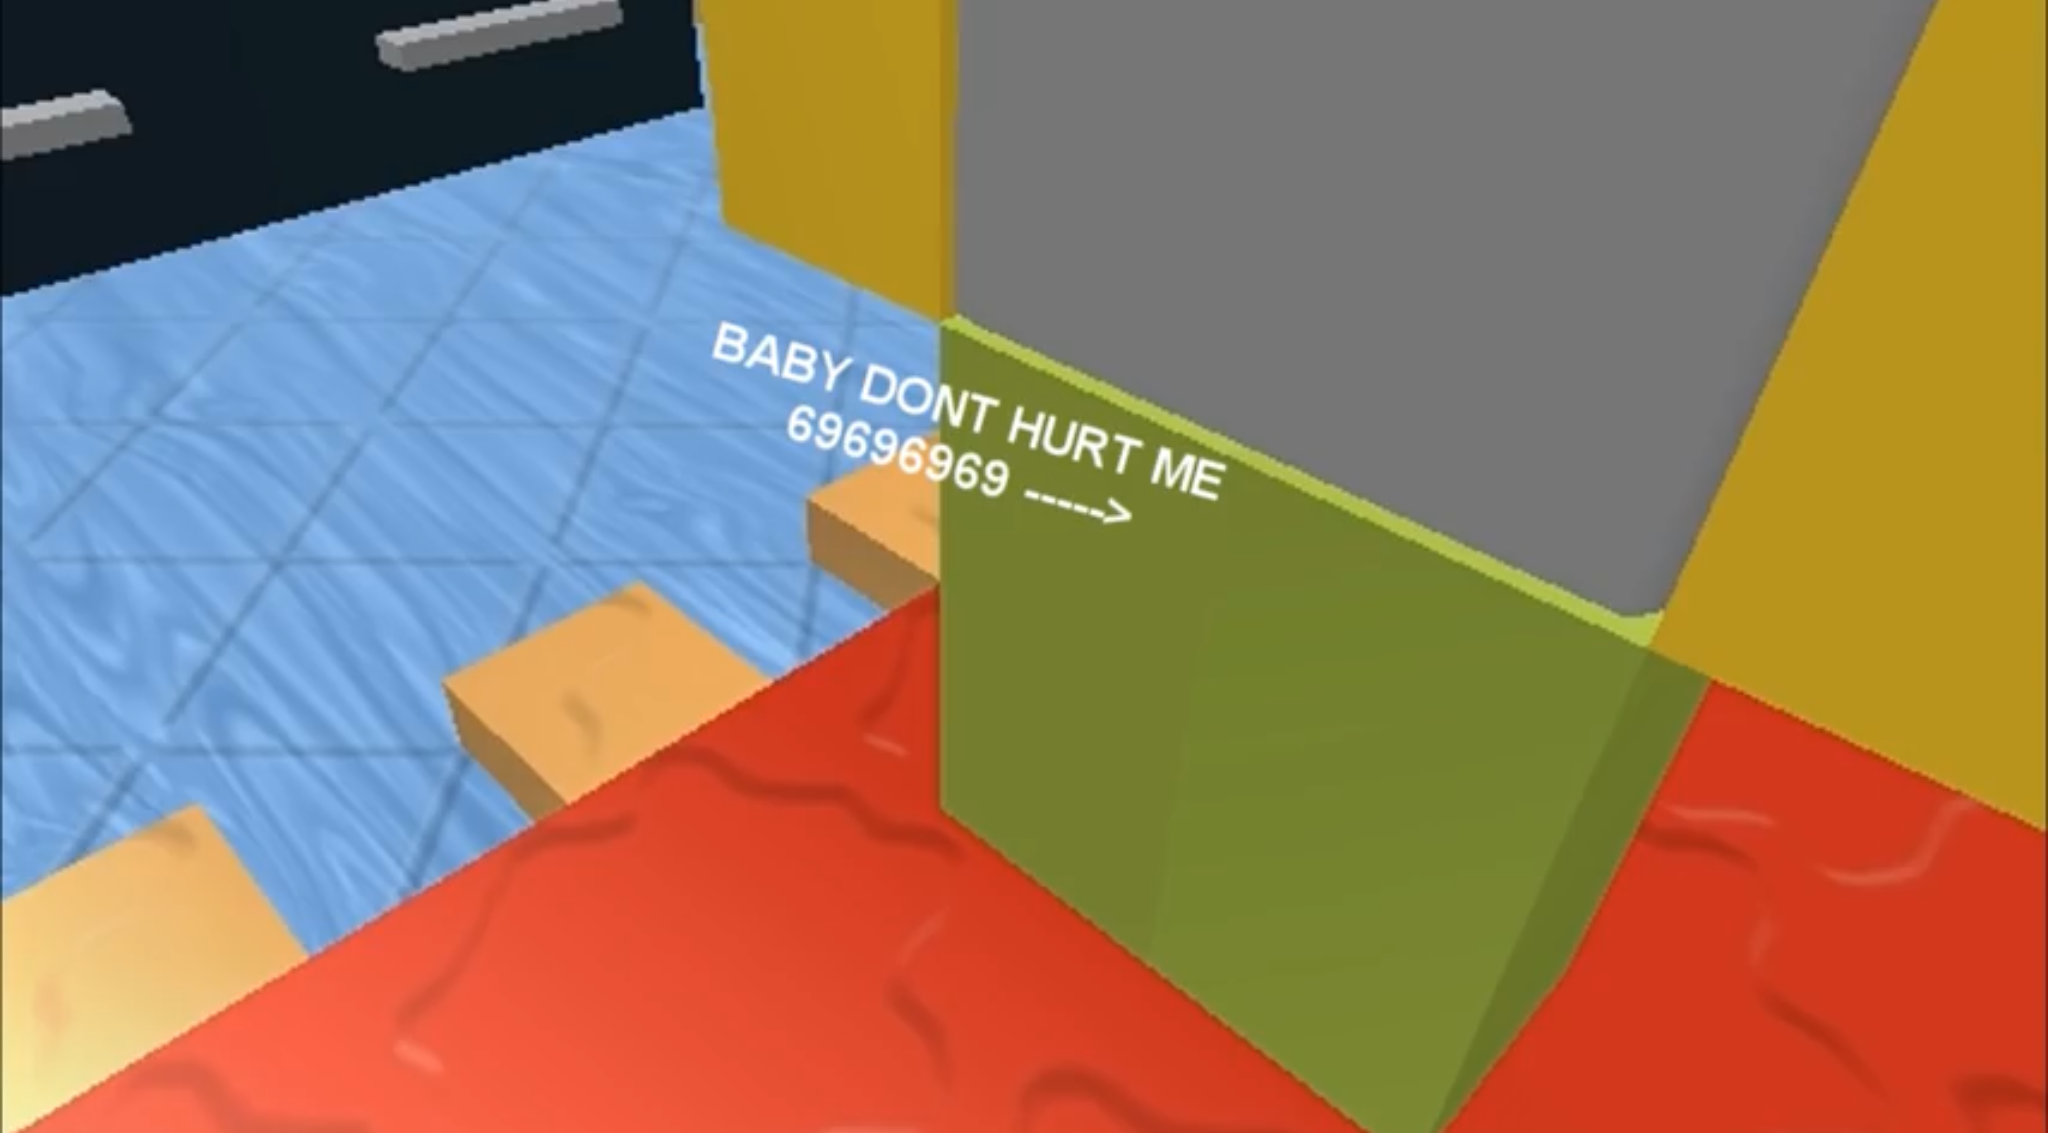 High Quality BABY DON’T HURT ME 69696969 Blank Meme Template